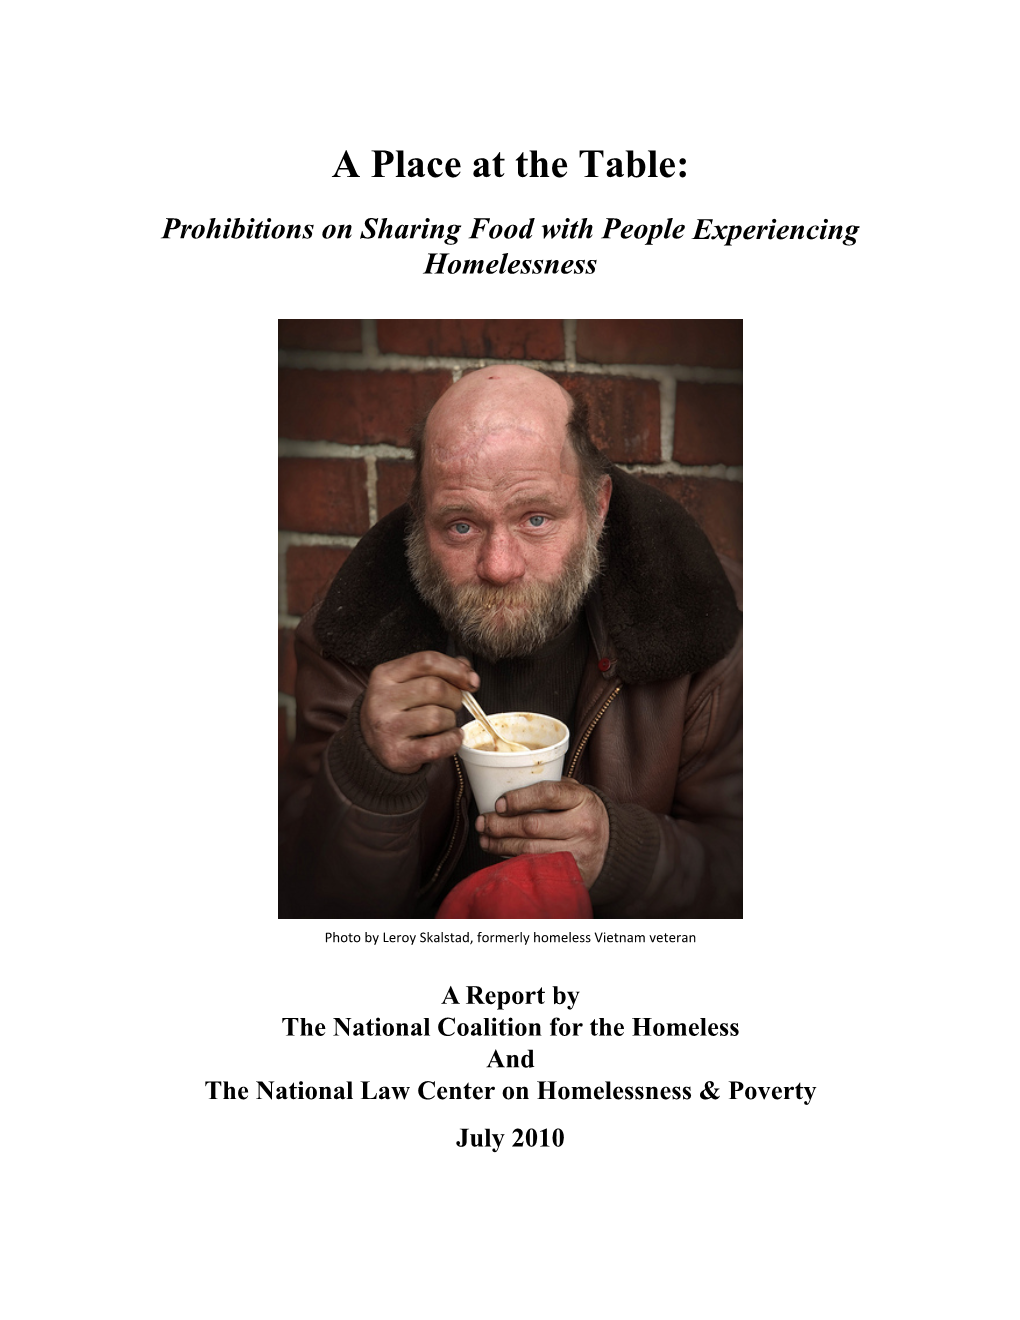 A Place at the Table: Prohibitions on Sharing Food with People Experiencing Homelessness